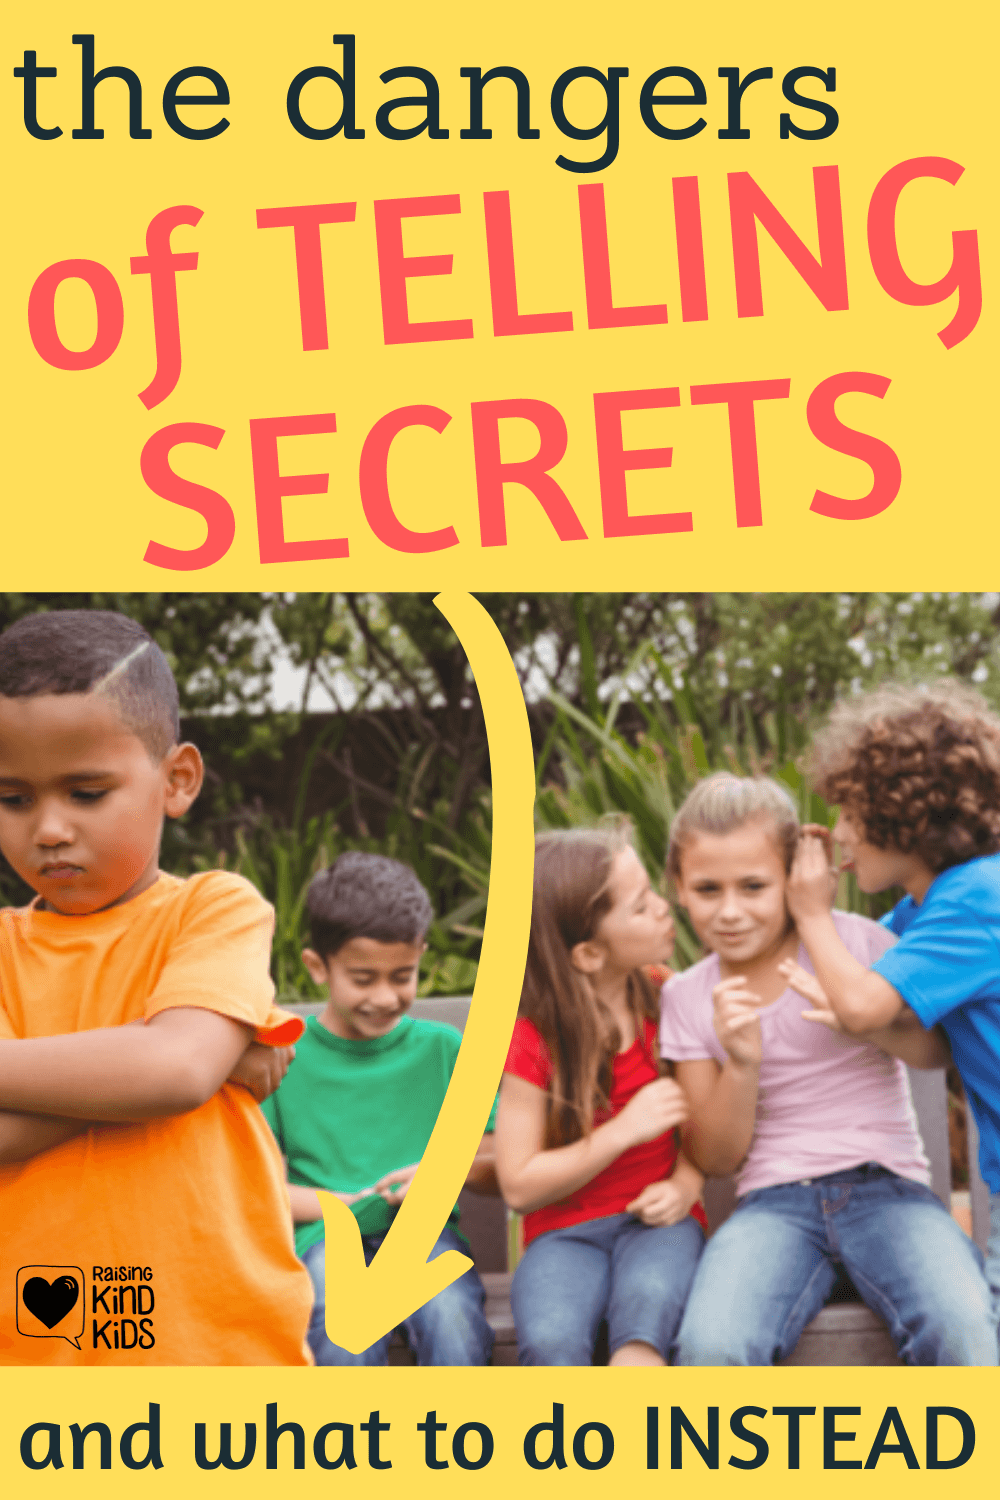 The dangers of telling secrets and the unkindness of telling secrets makes secrets a no go for us. Here's what to teach your kids instead so they can still share private information in a safe and thoughtful way.